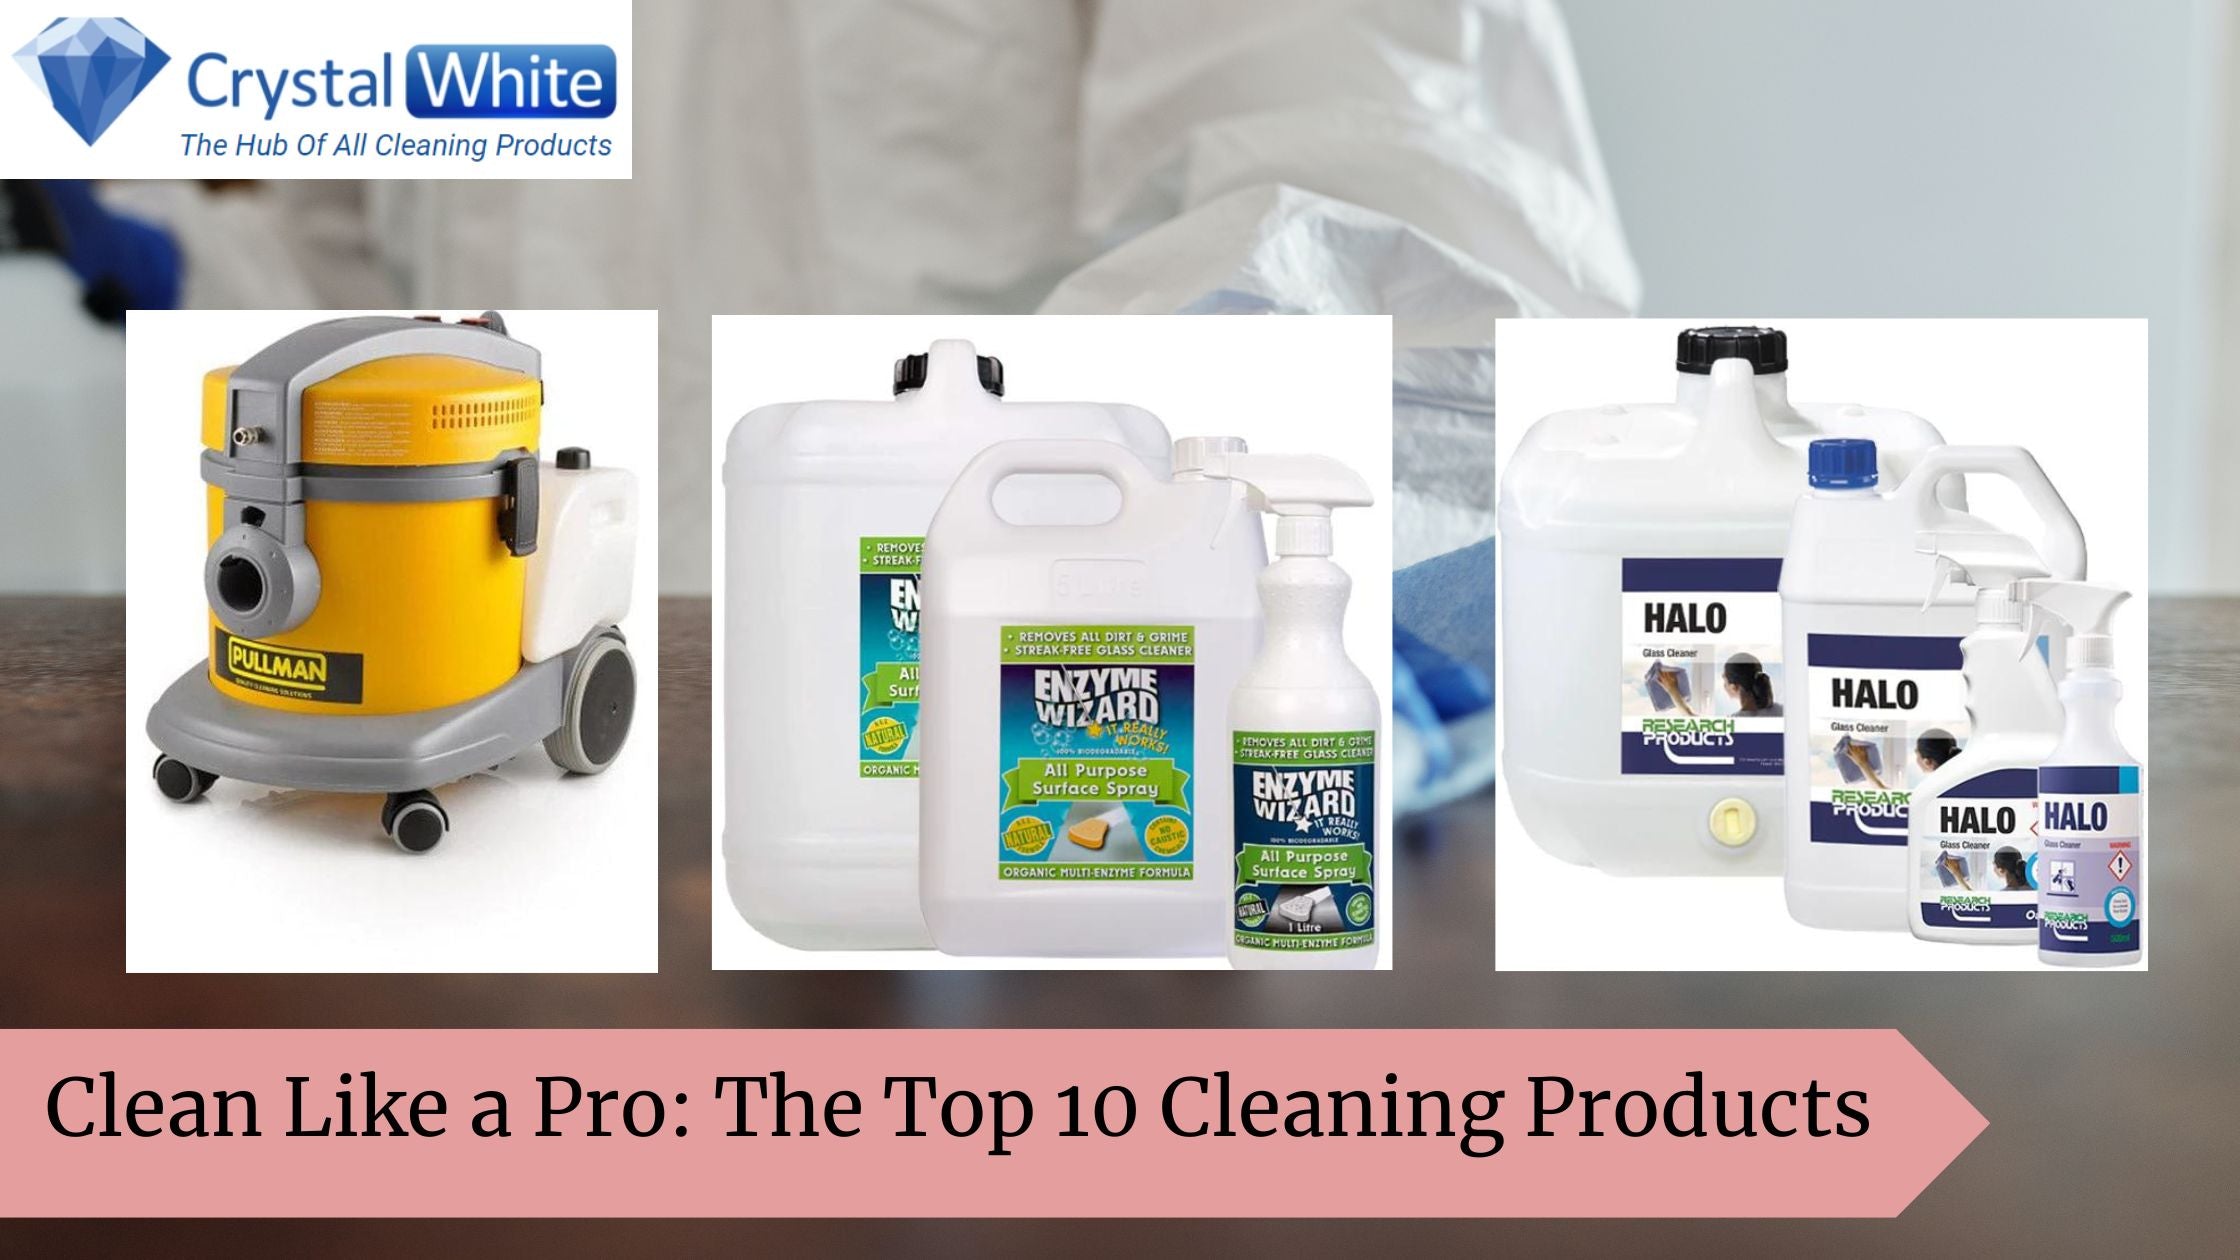 Clean Like a Pro: The Top 10 Cleaning Products